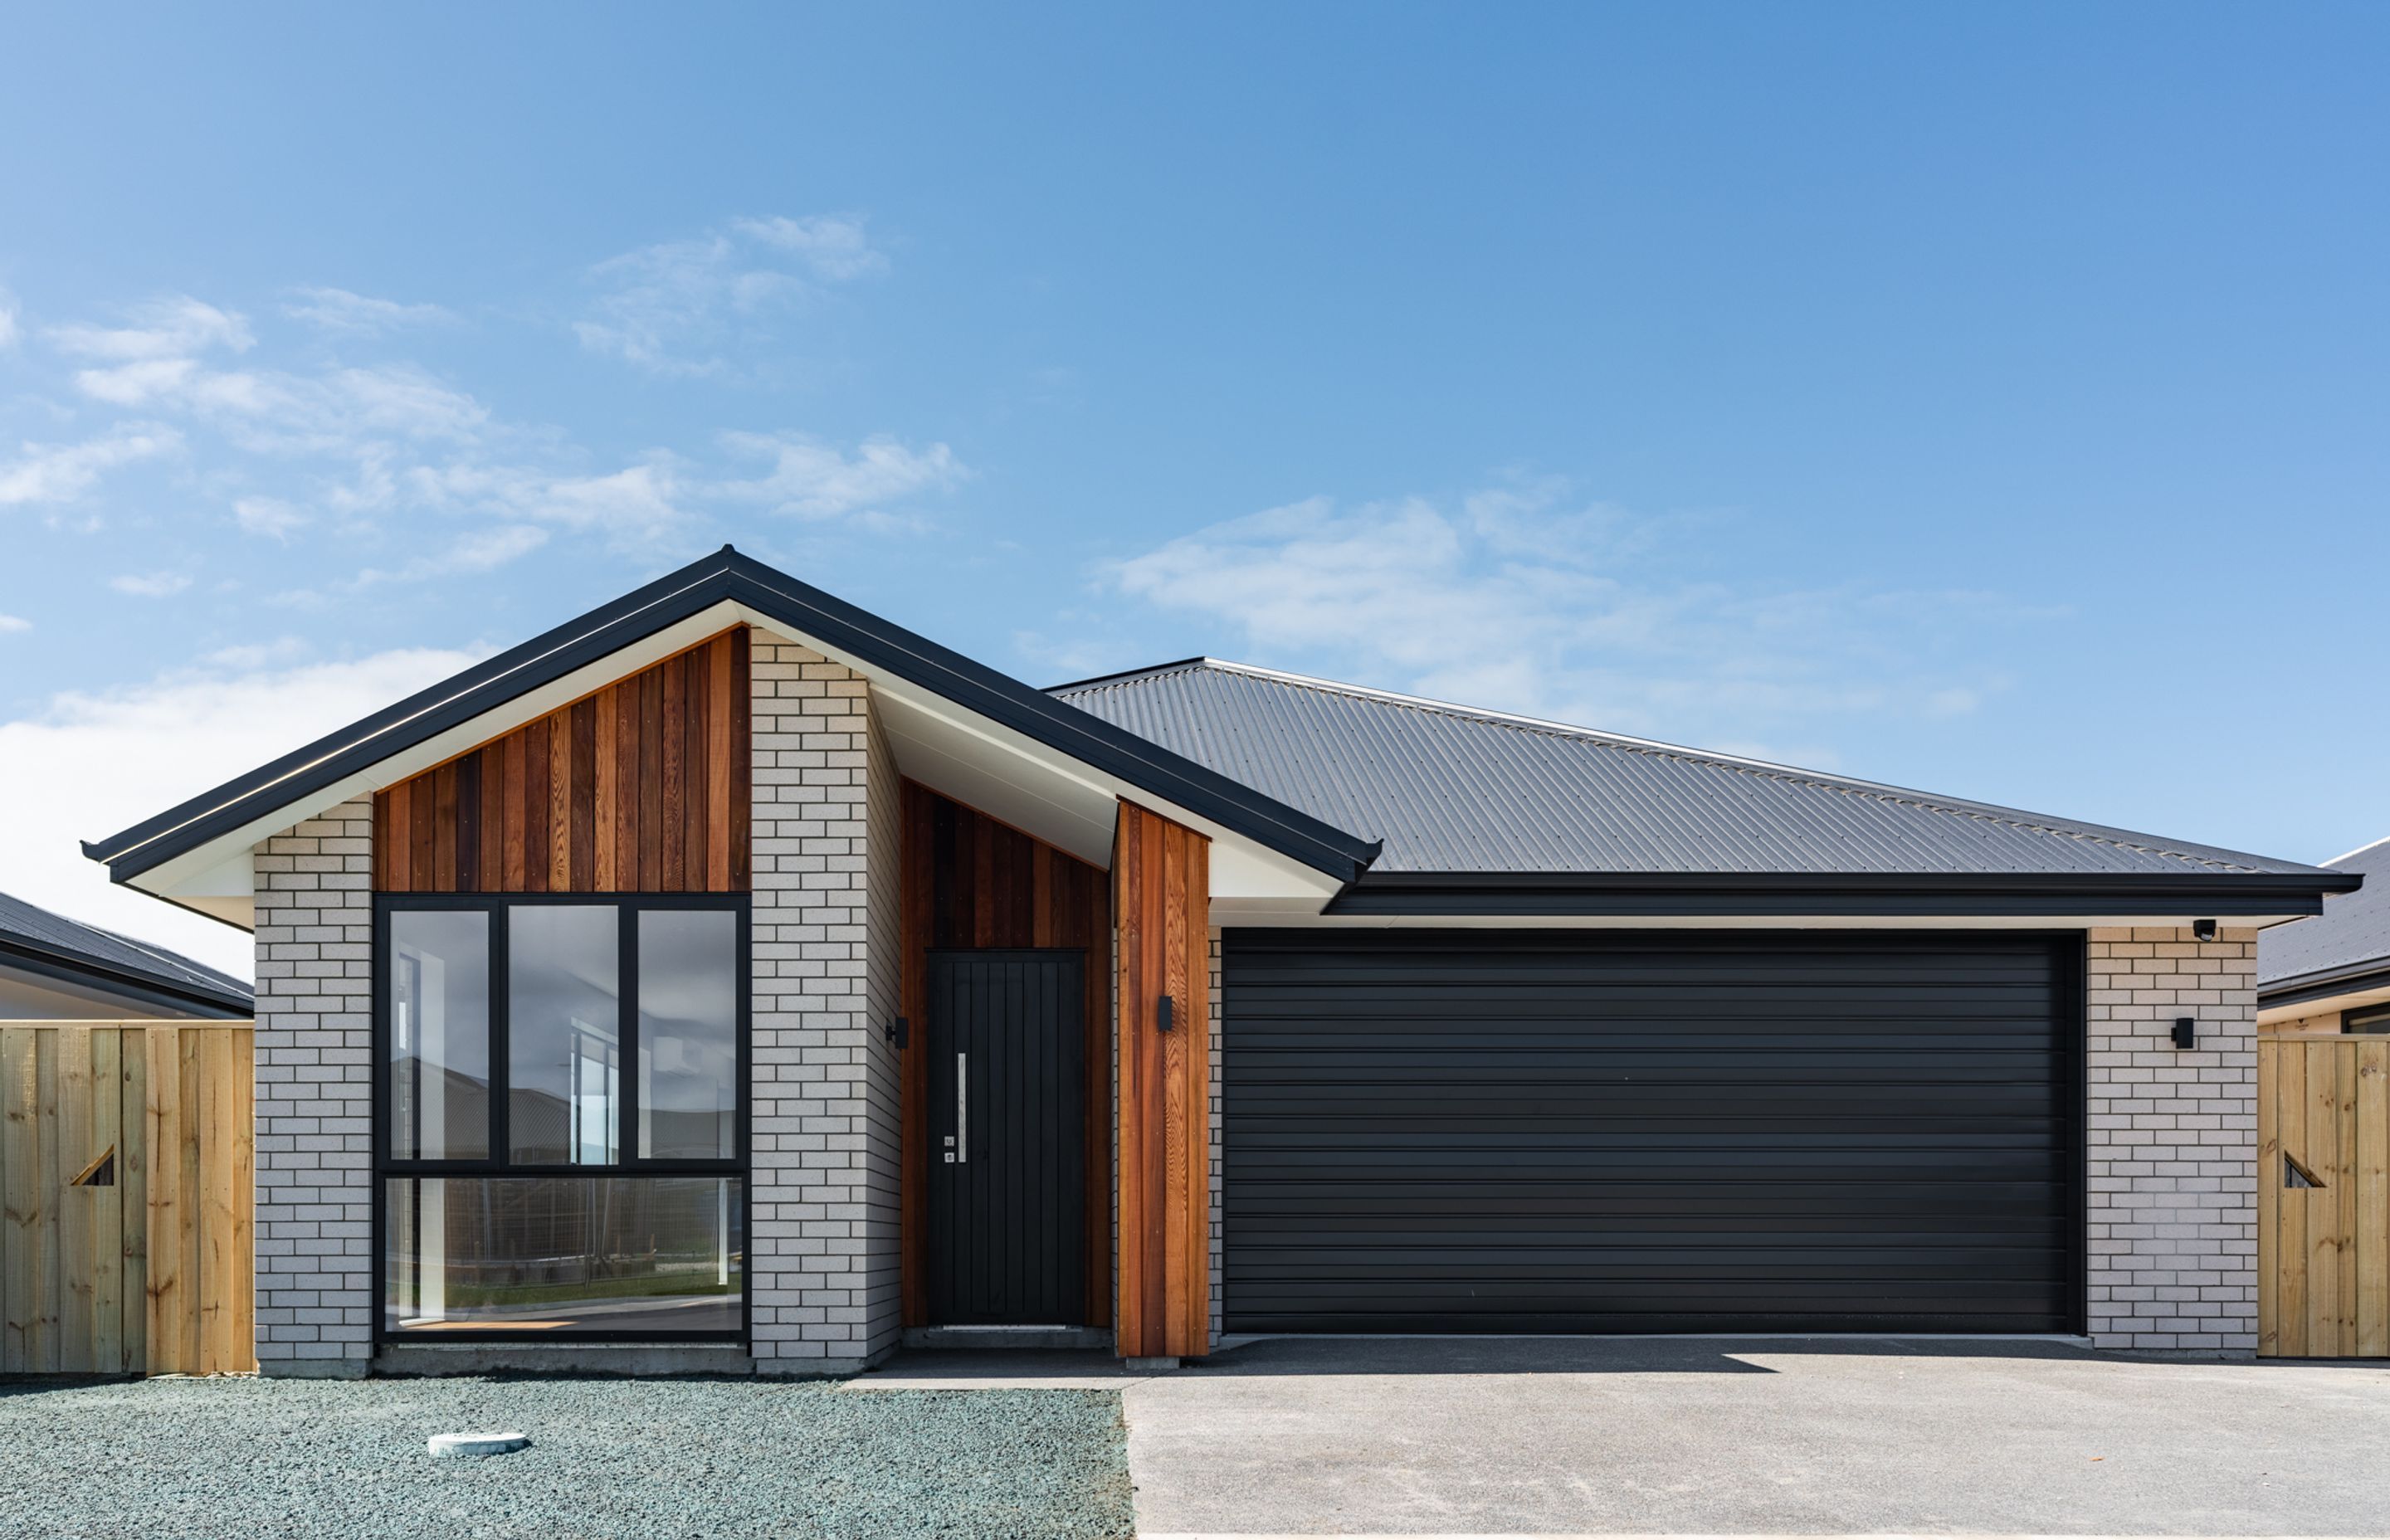 A three bedroom contemporary home built by Bird Built stands proud on a 425m2 section in the Ravenswood subdivision.